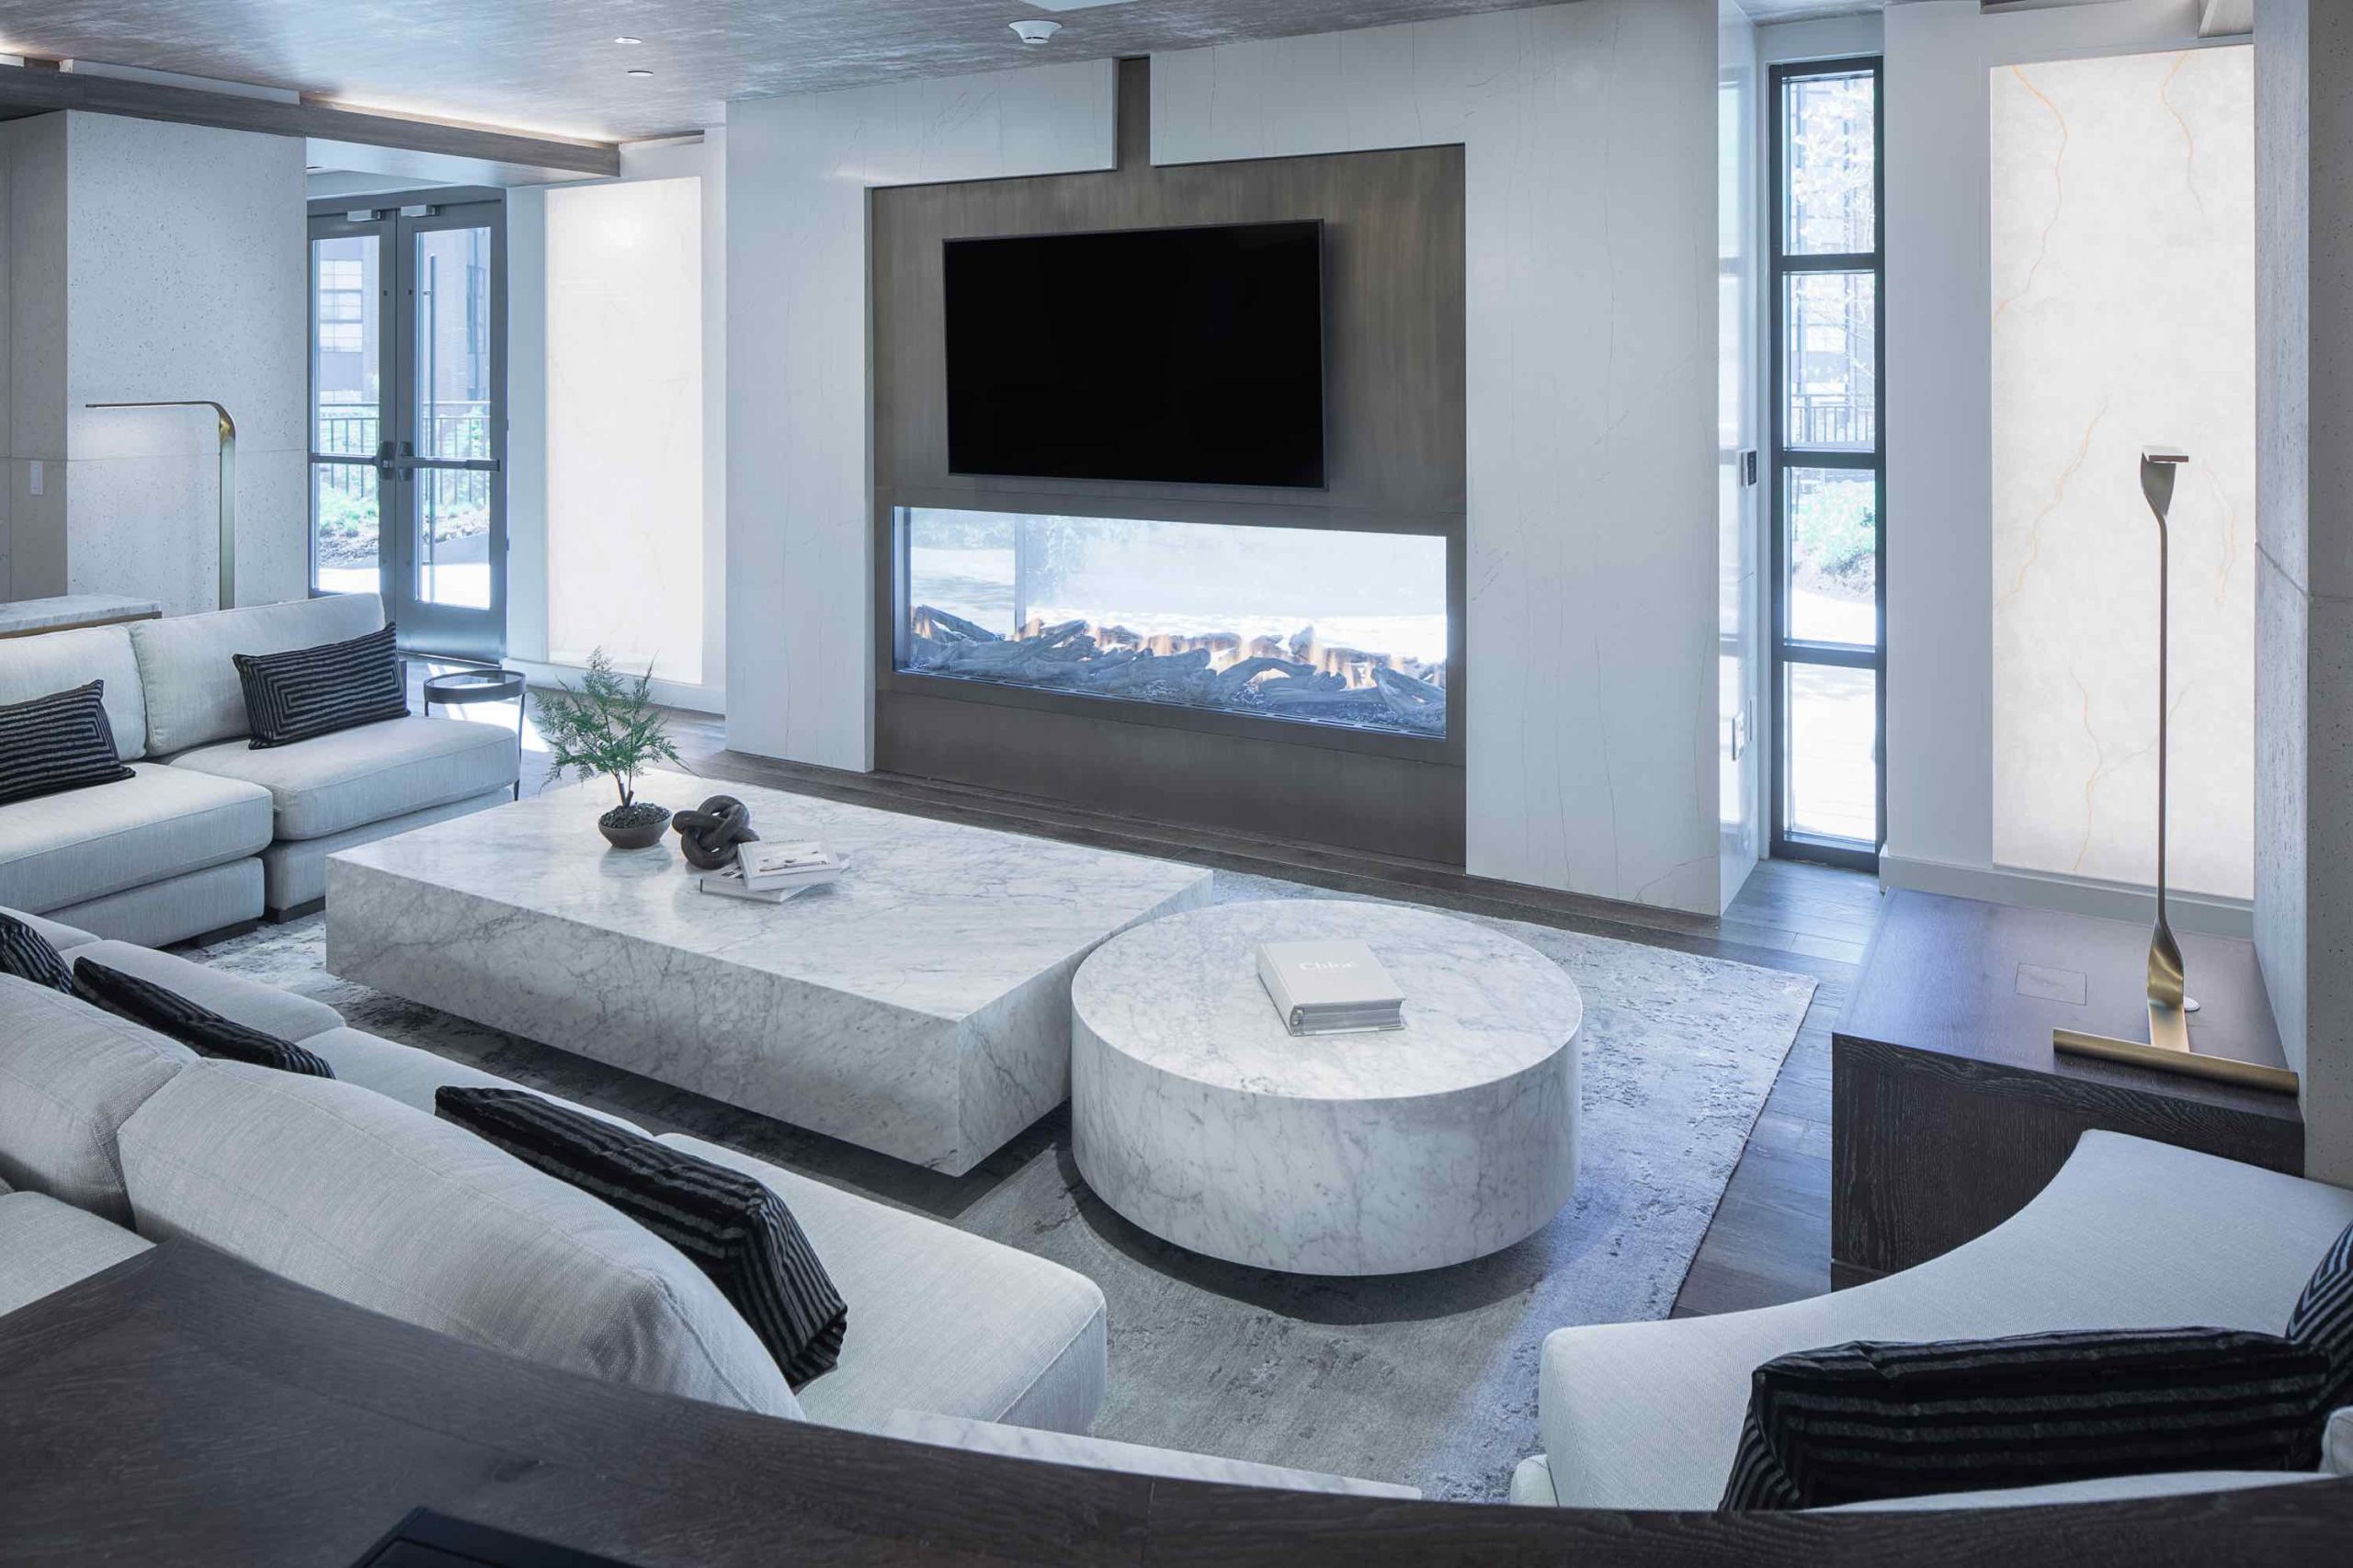 Clubroom featuring plush couches, a flat screen TV, & marble coffee tables. One of the amenities of 250 Mission in Baltimore, MD.